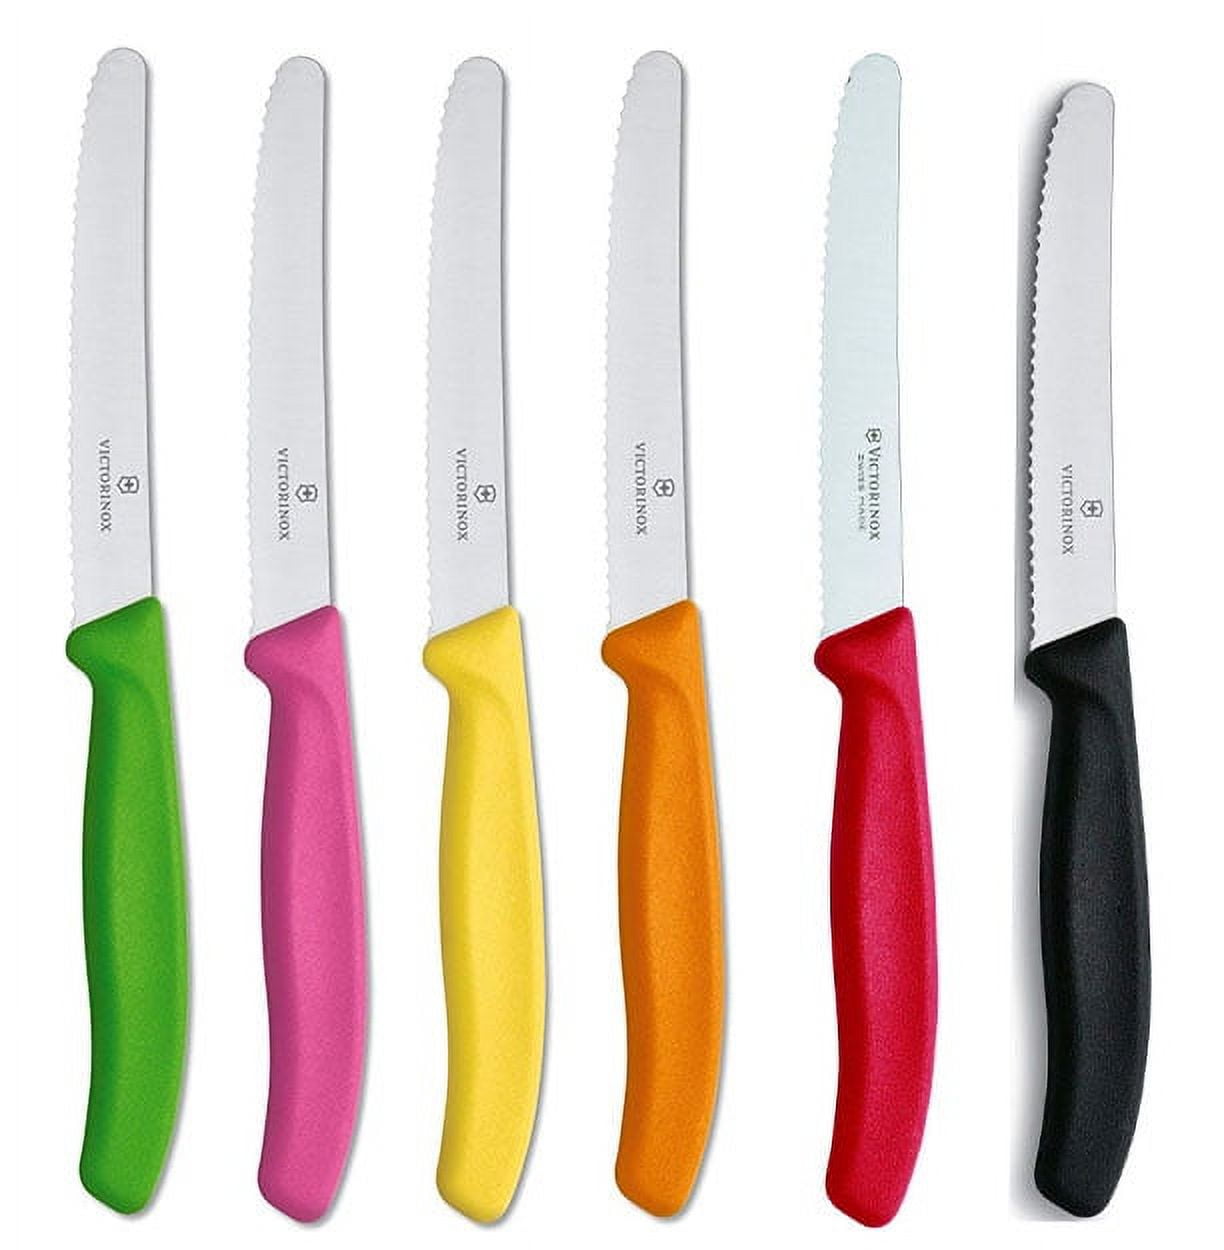 Swiss Classic Colorful 6-Piece 4.5 Serrated Utility Knife Set by